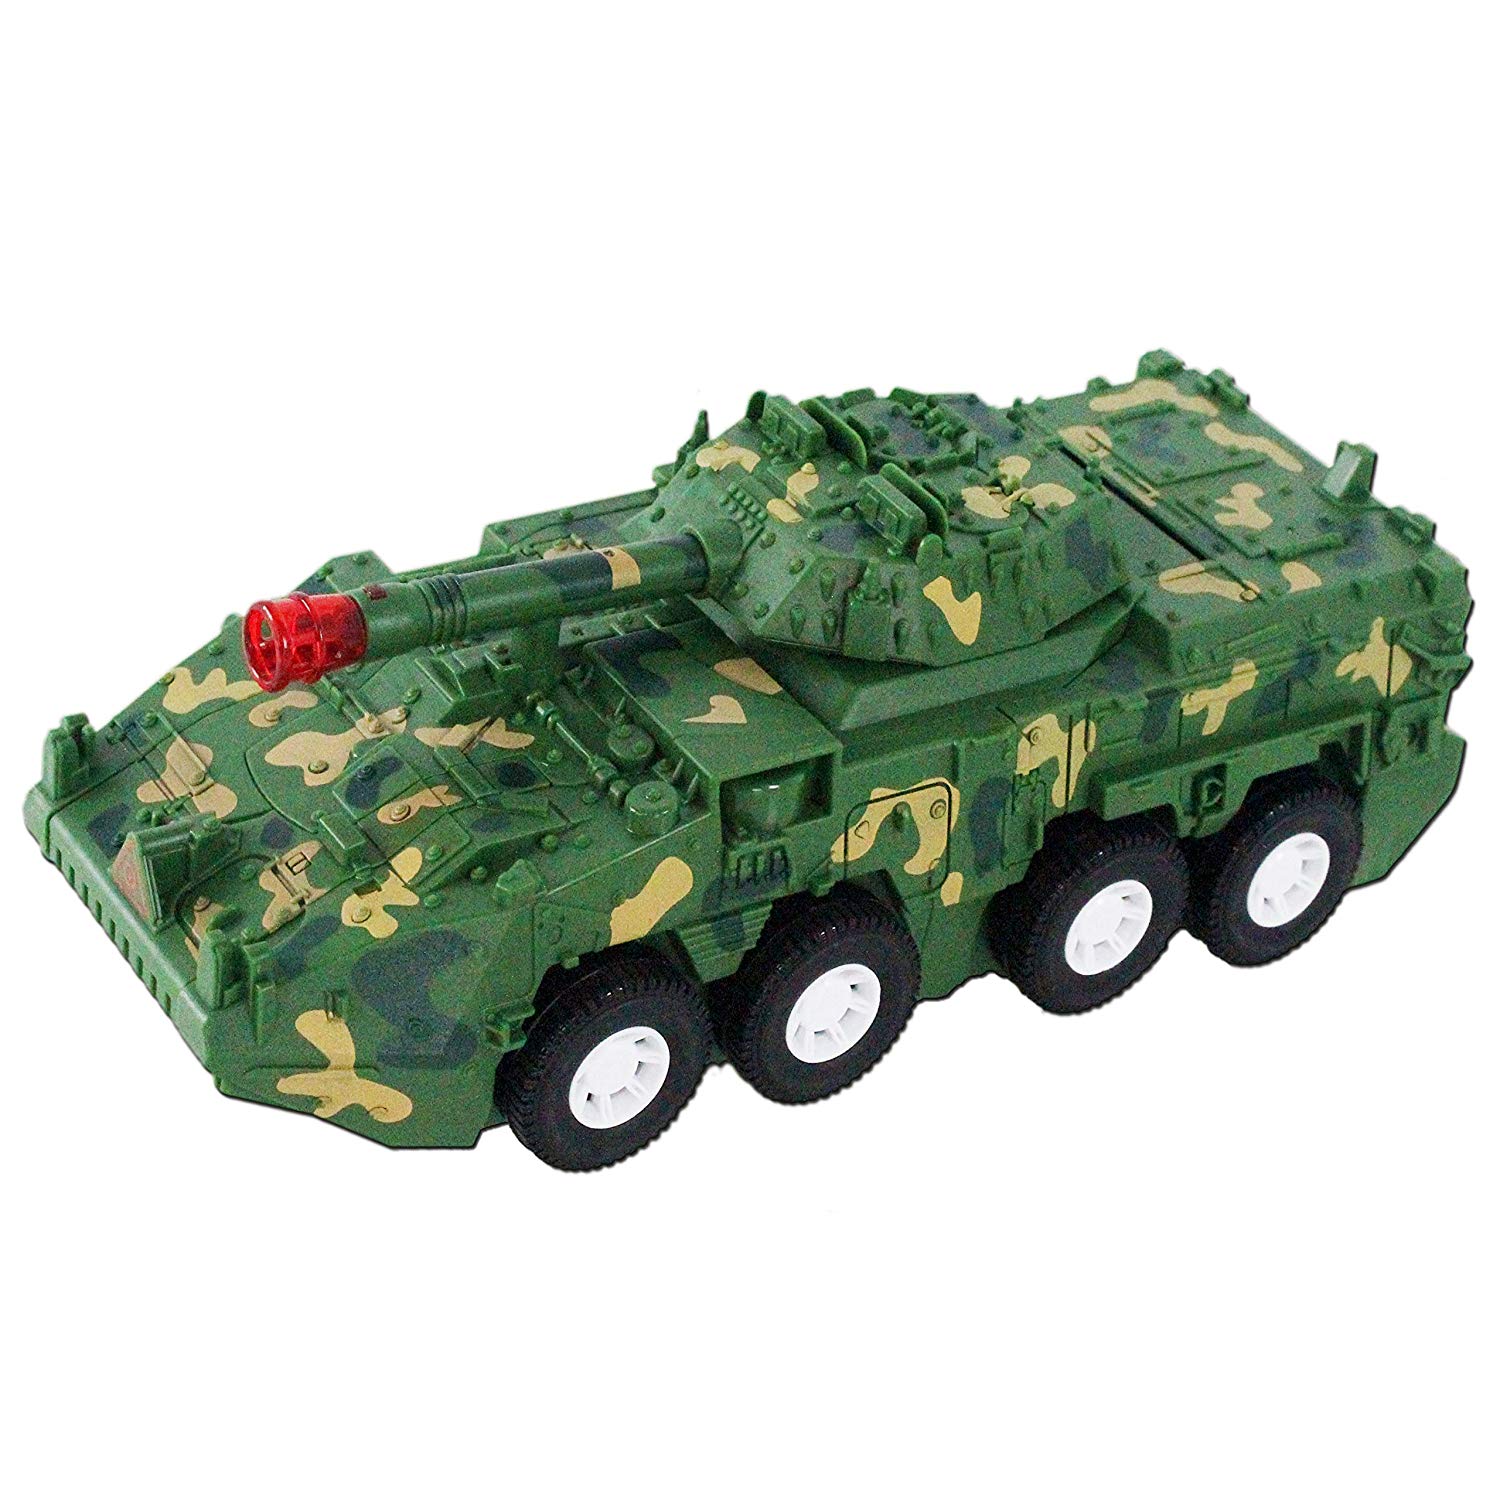 wolvol bump and go action electric military tank fighter toy with lights and sounds